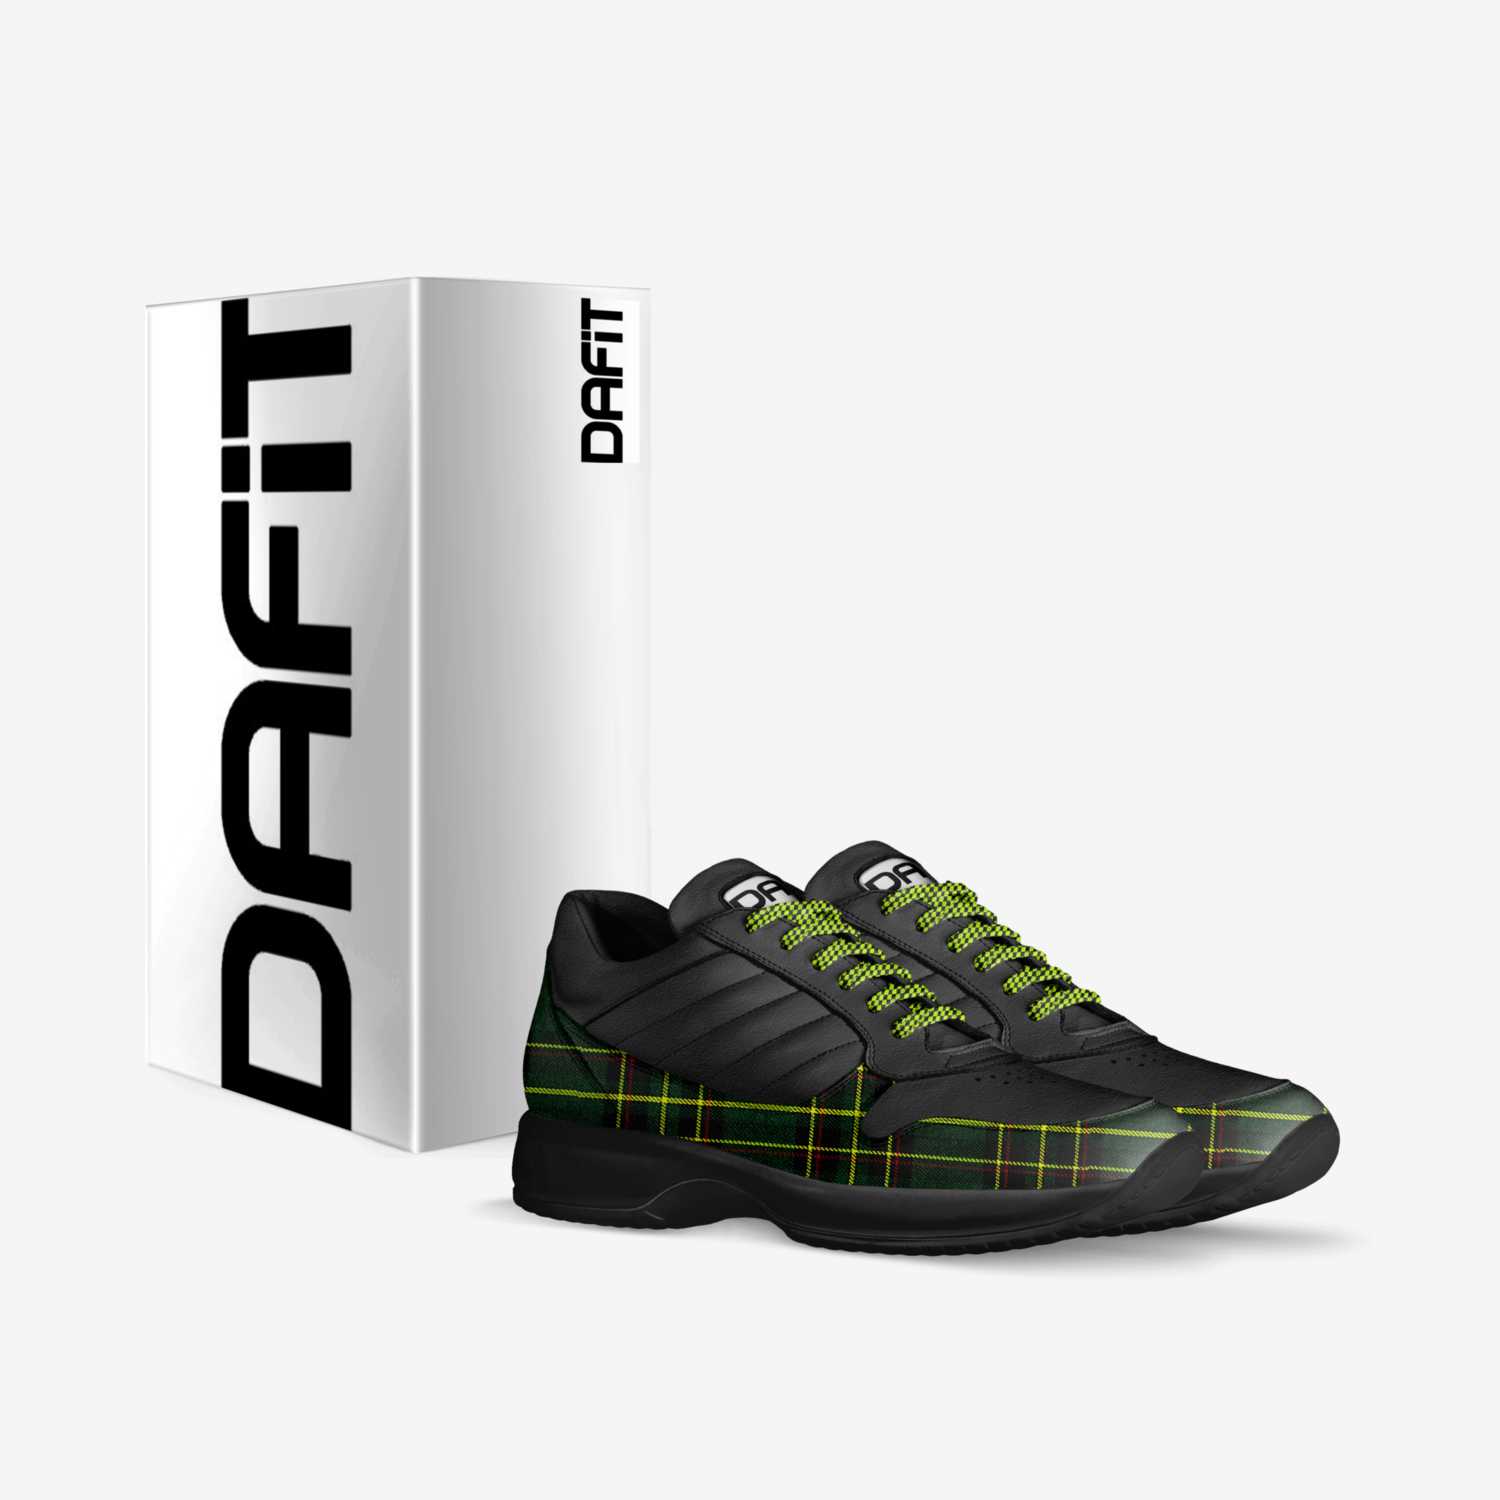 Dafit Meta1s custom made in Italy shoes by Michael Brownlee | Box view